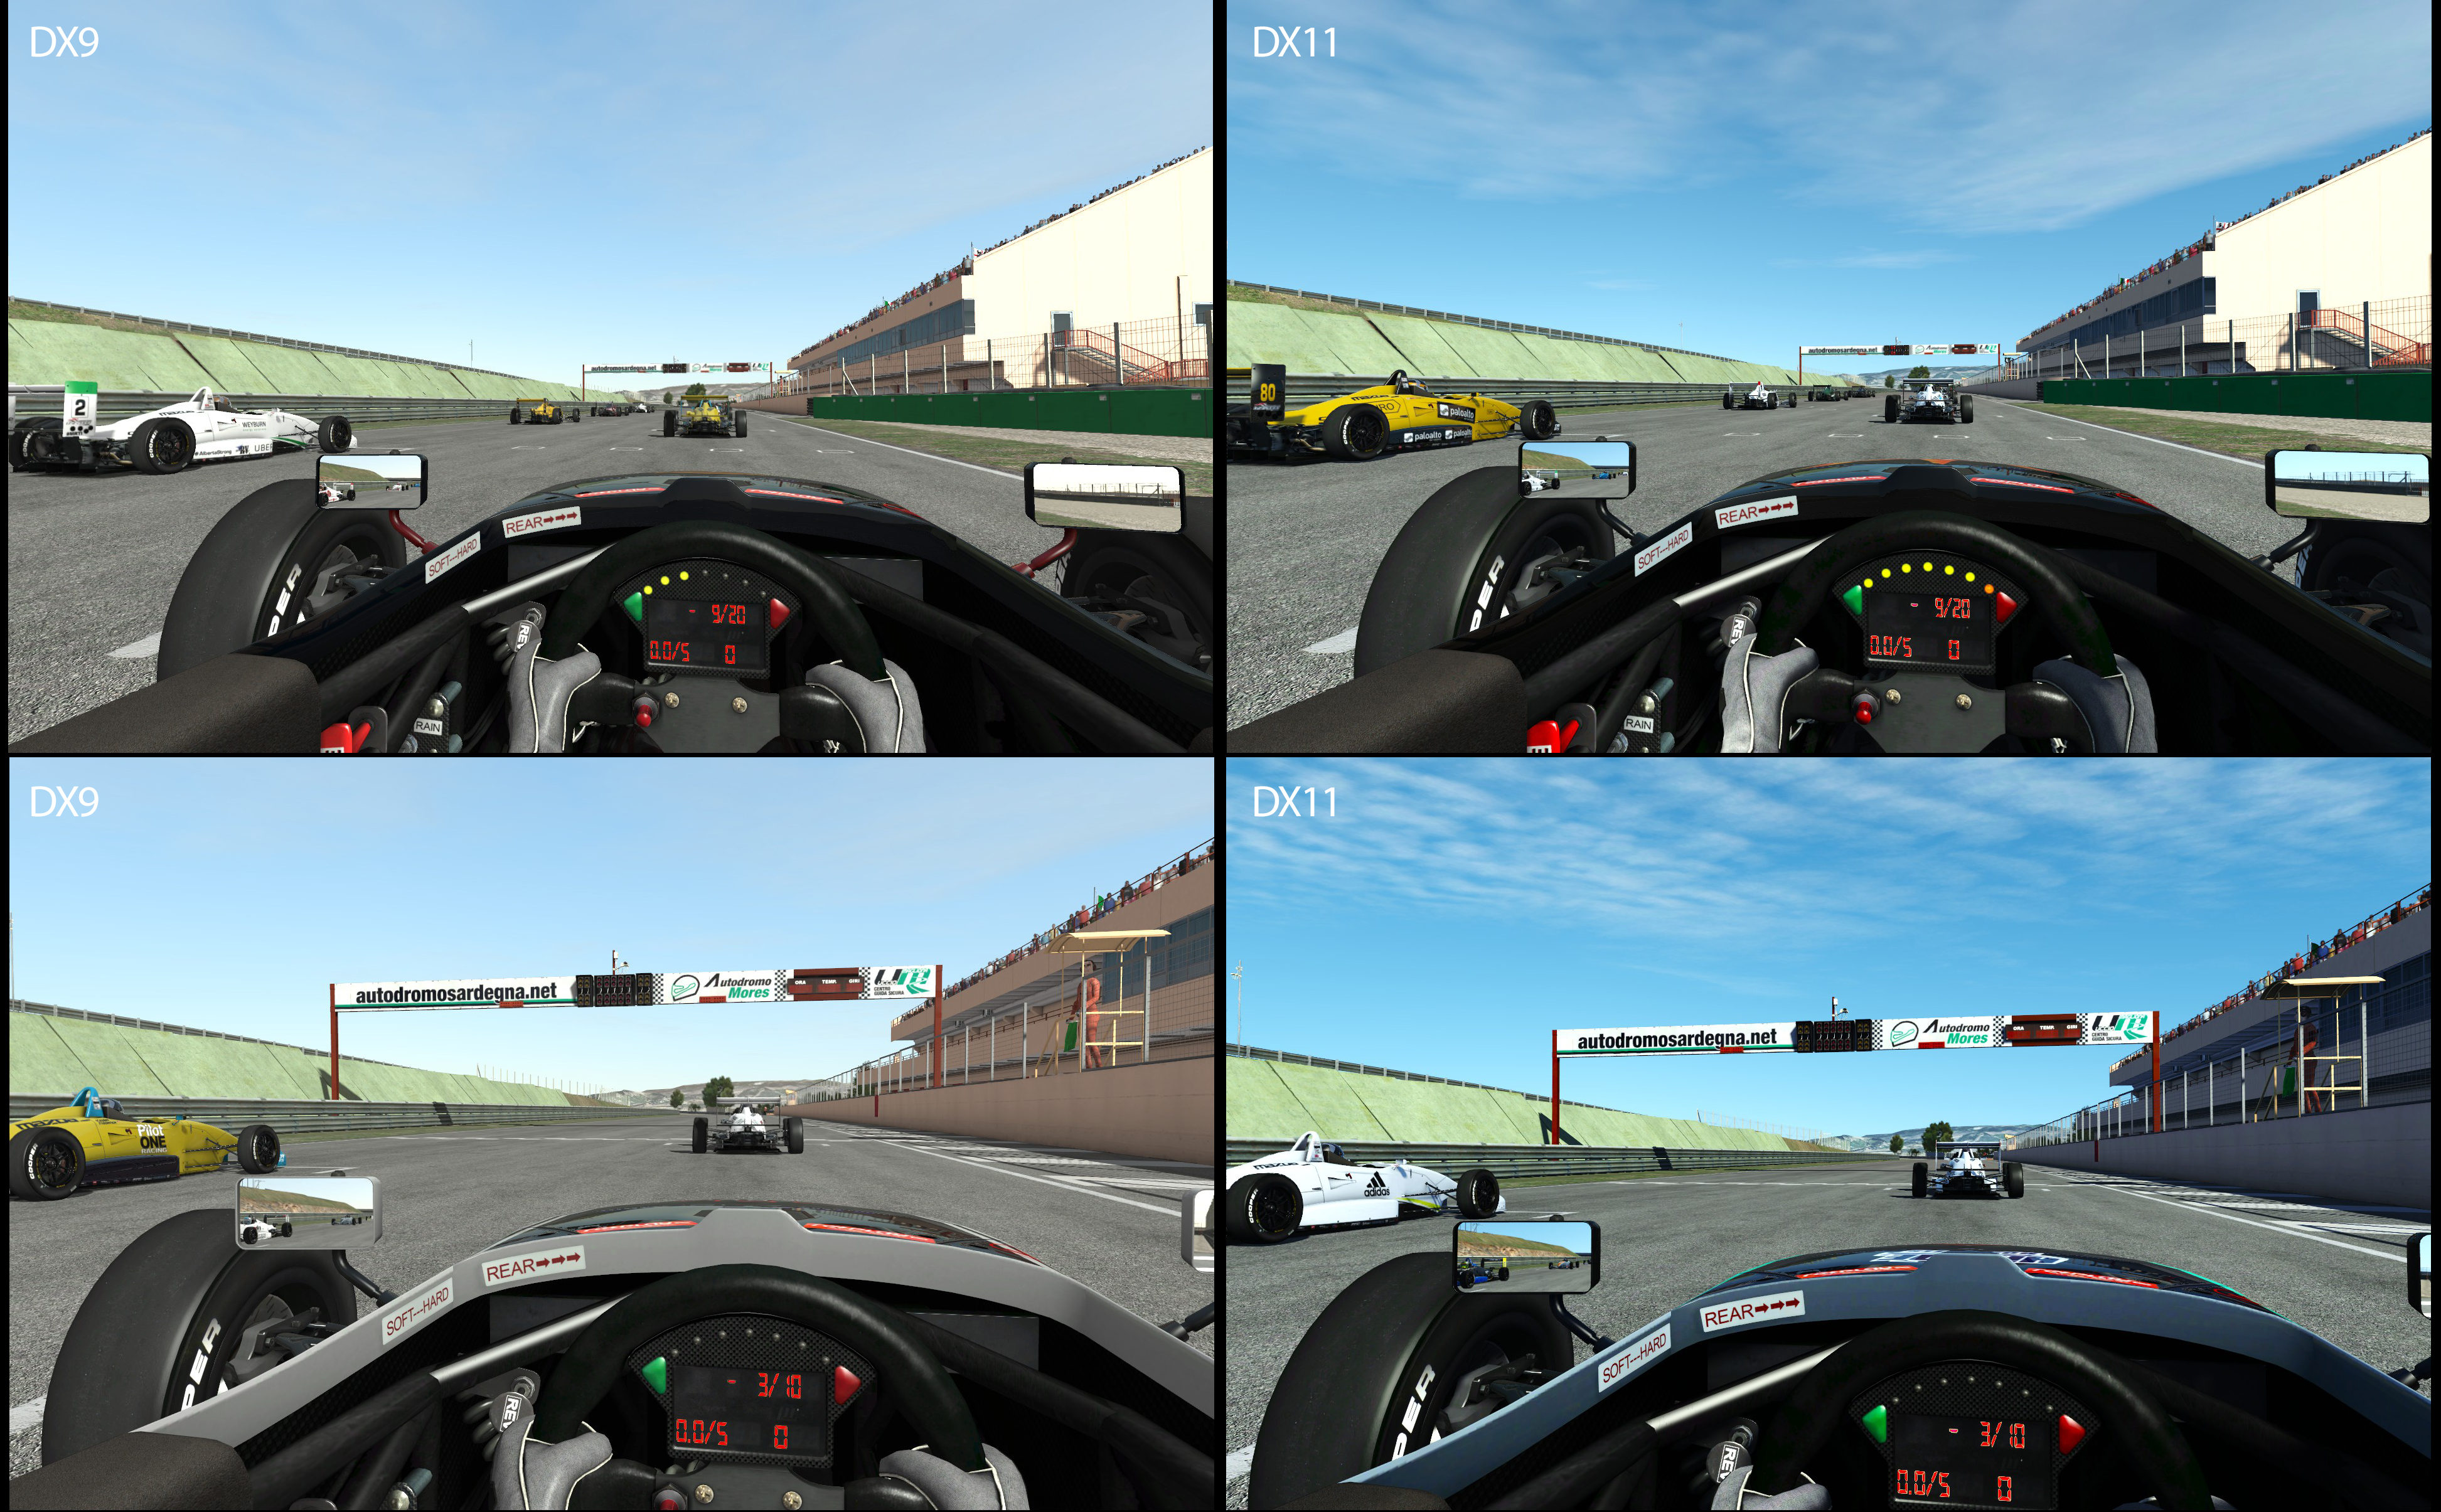 More information about "rFactor 2, Roadmap Update di Gennaio"